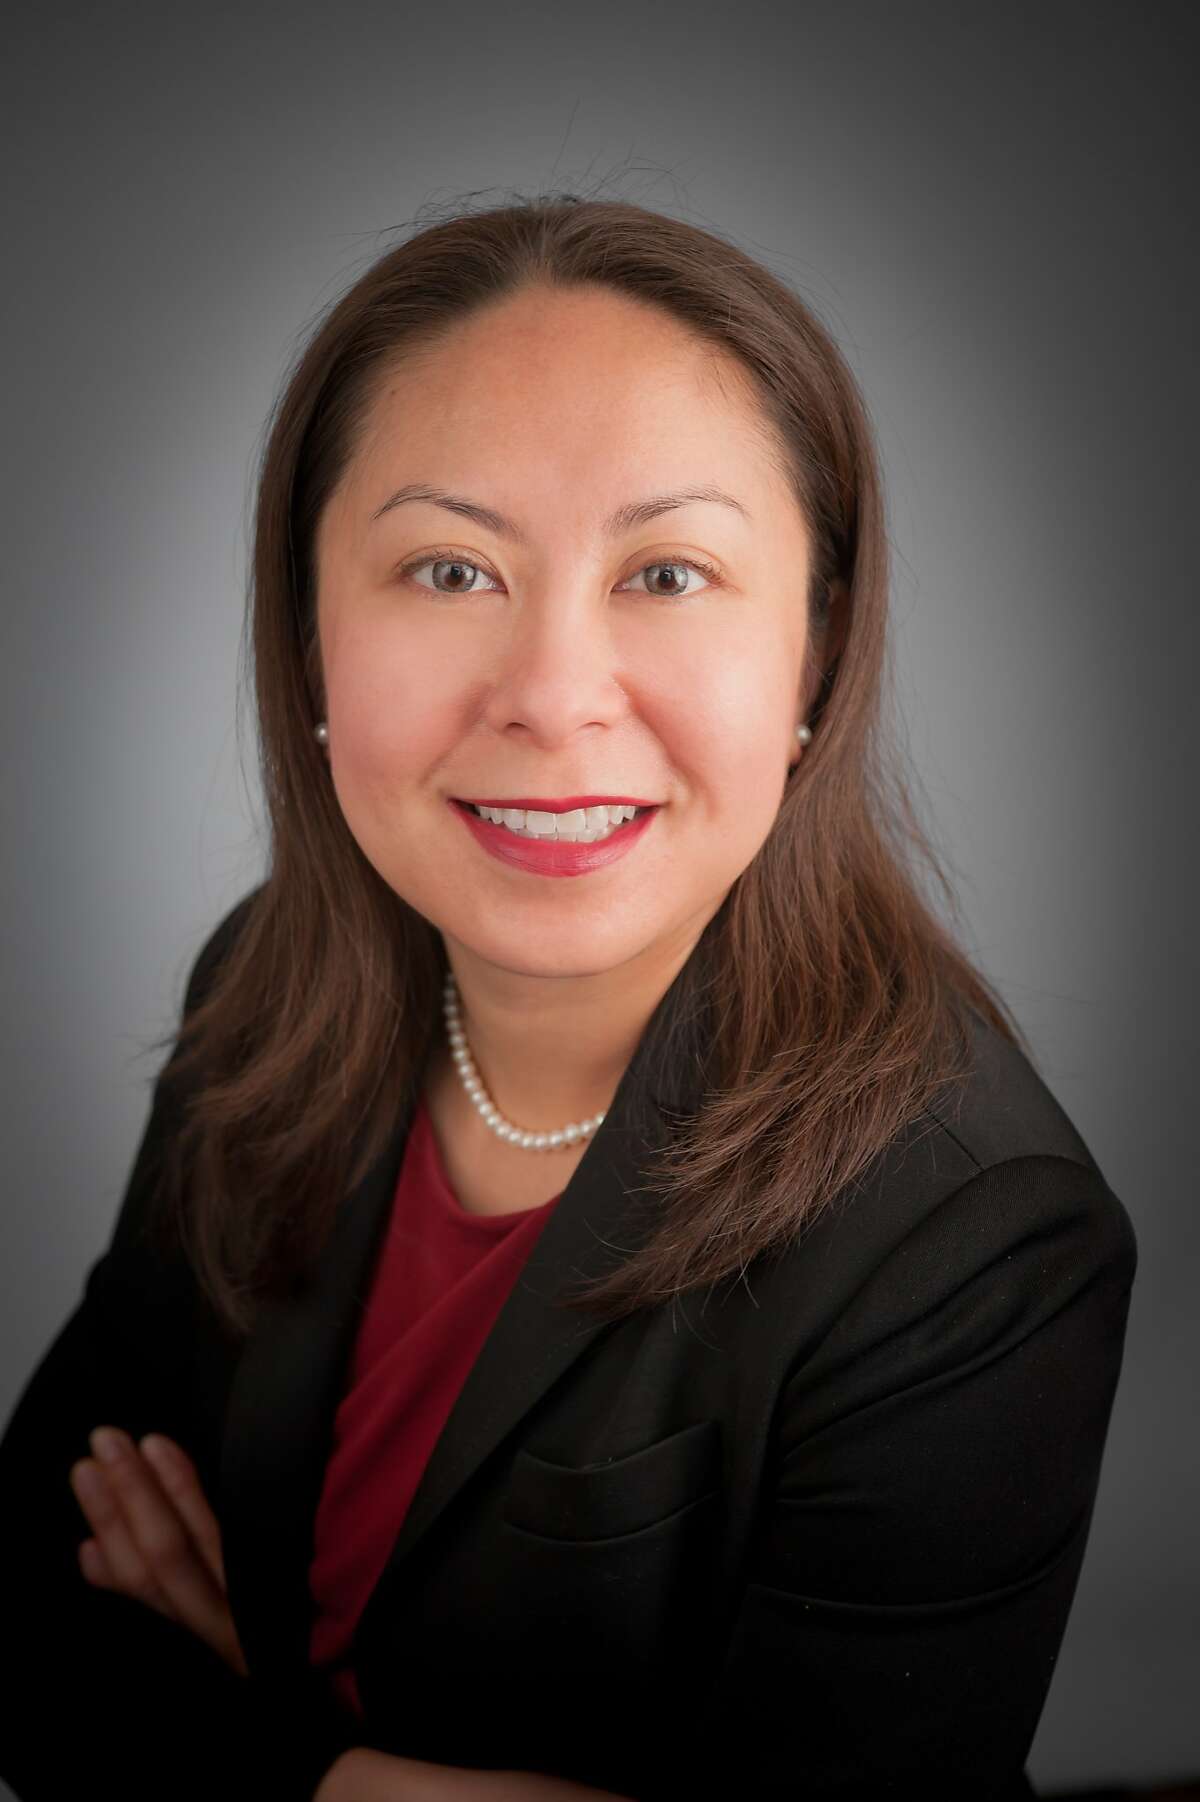 CTC | myCFO hired Susanna Poon as director of philanthropy services.